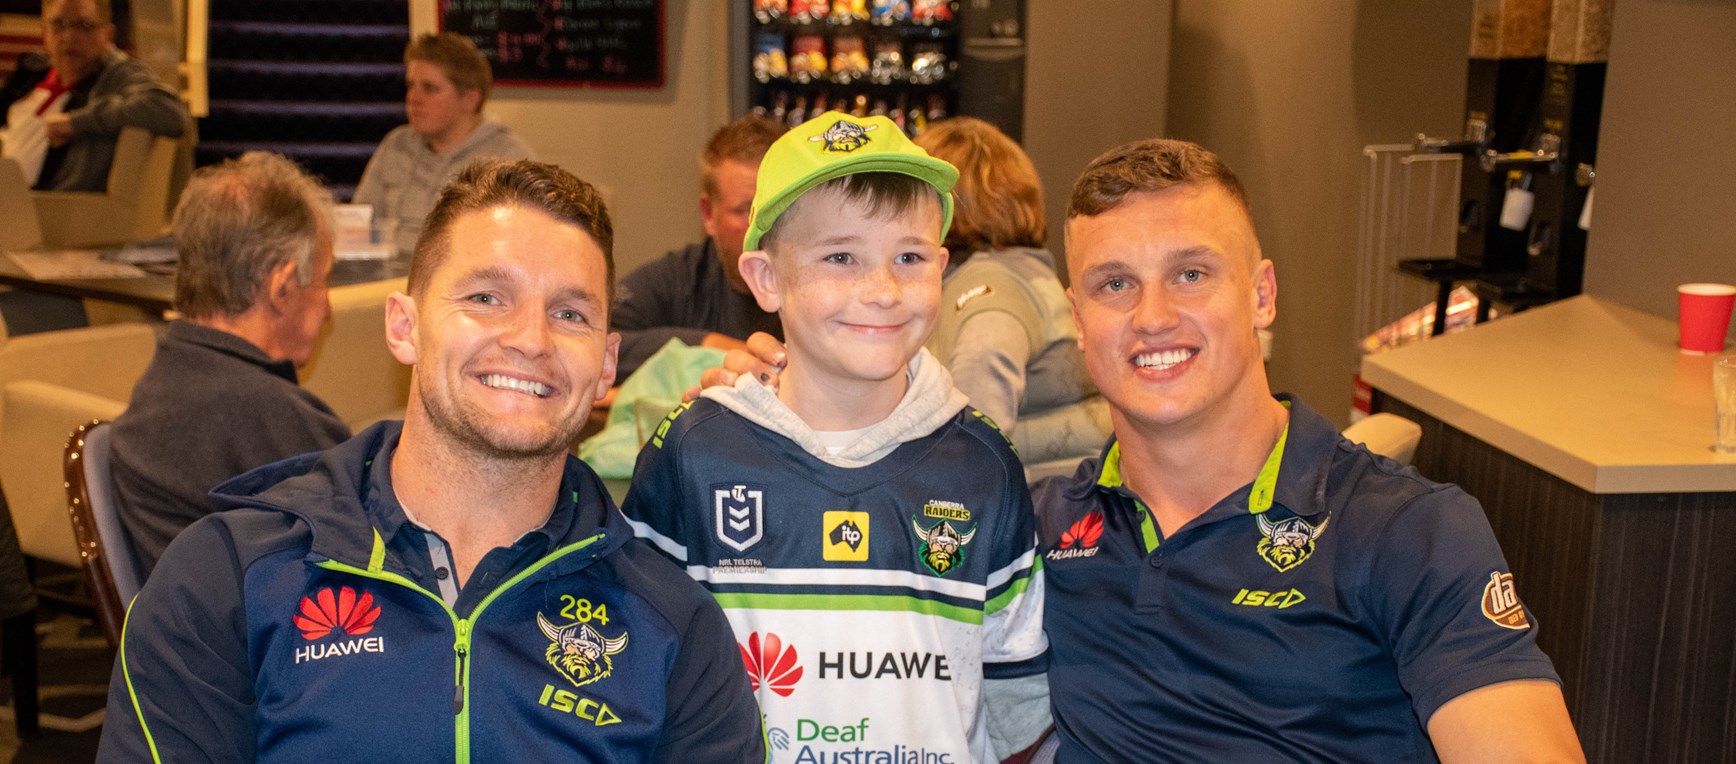 Gallery: Signing session at Raiders Weston